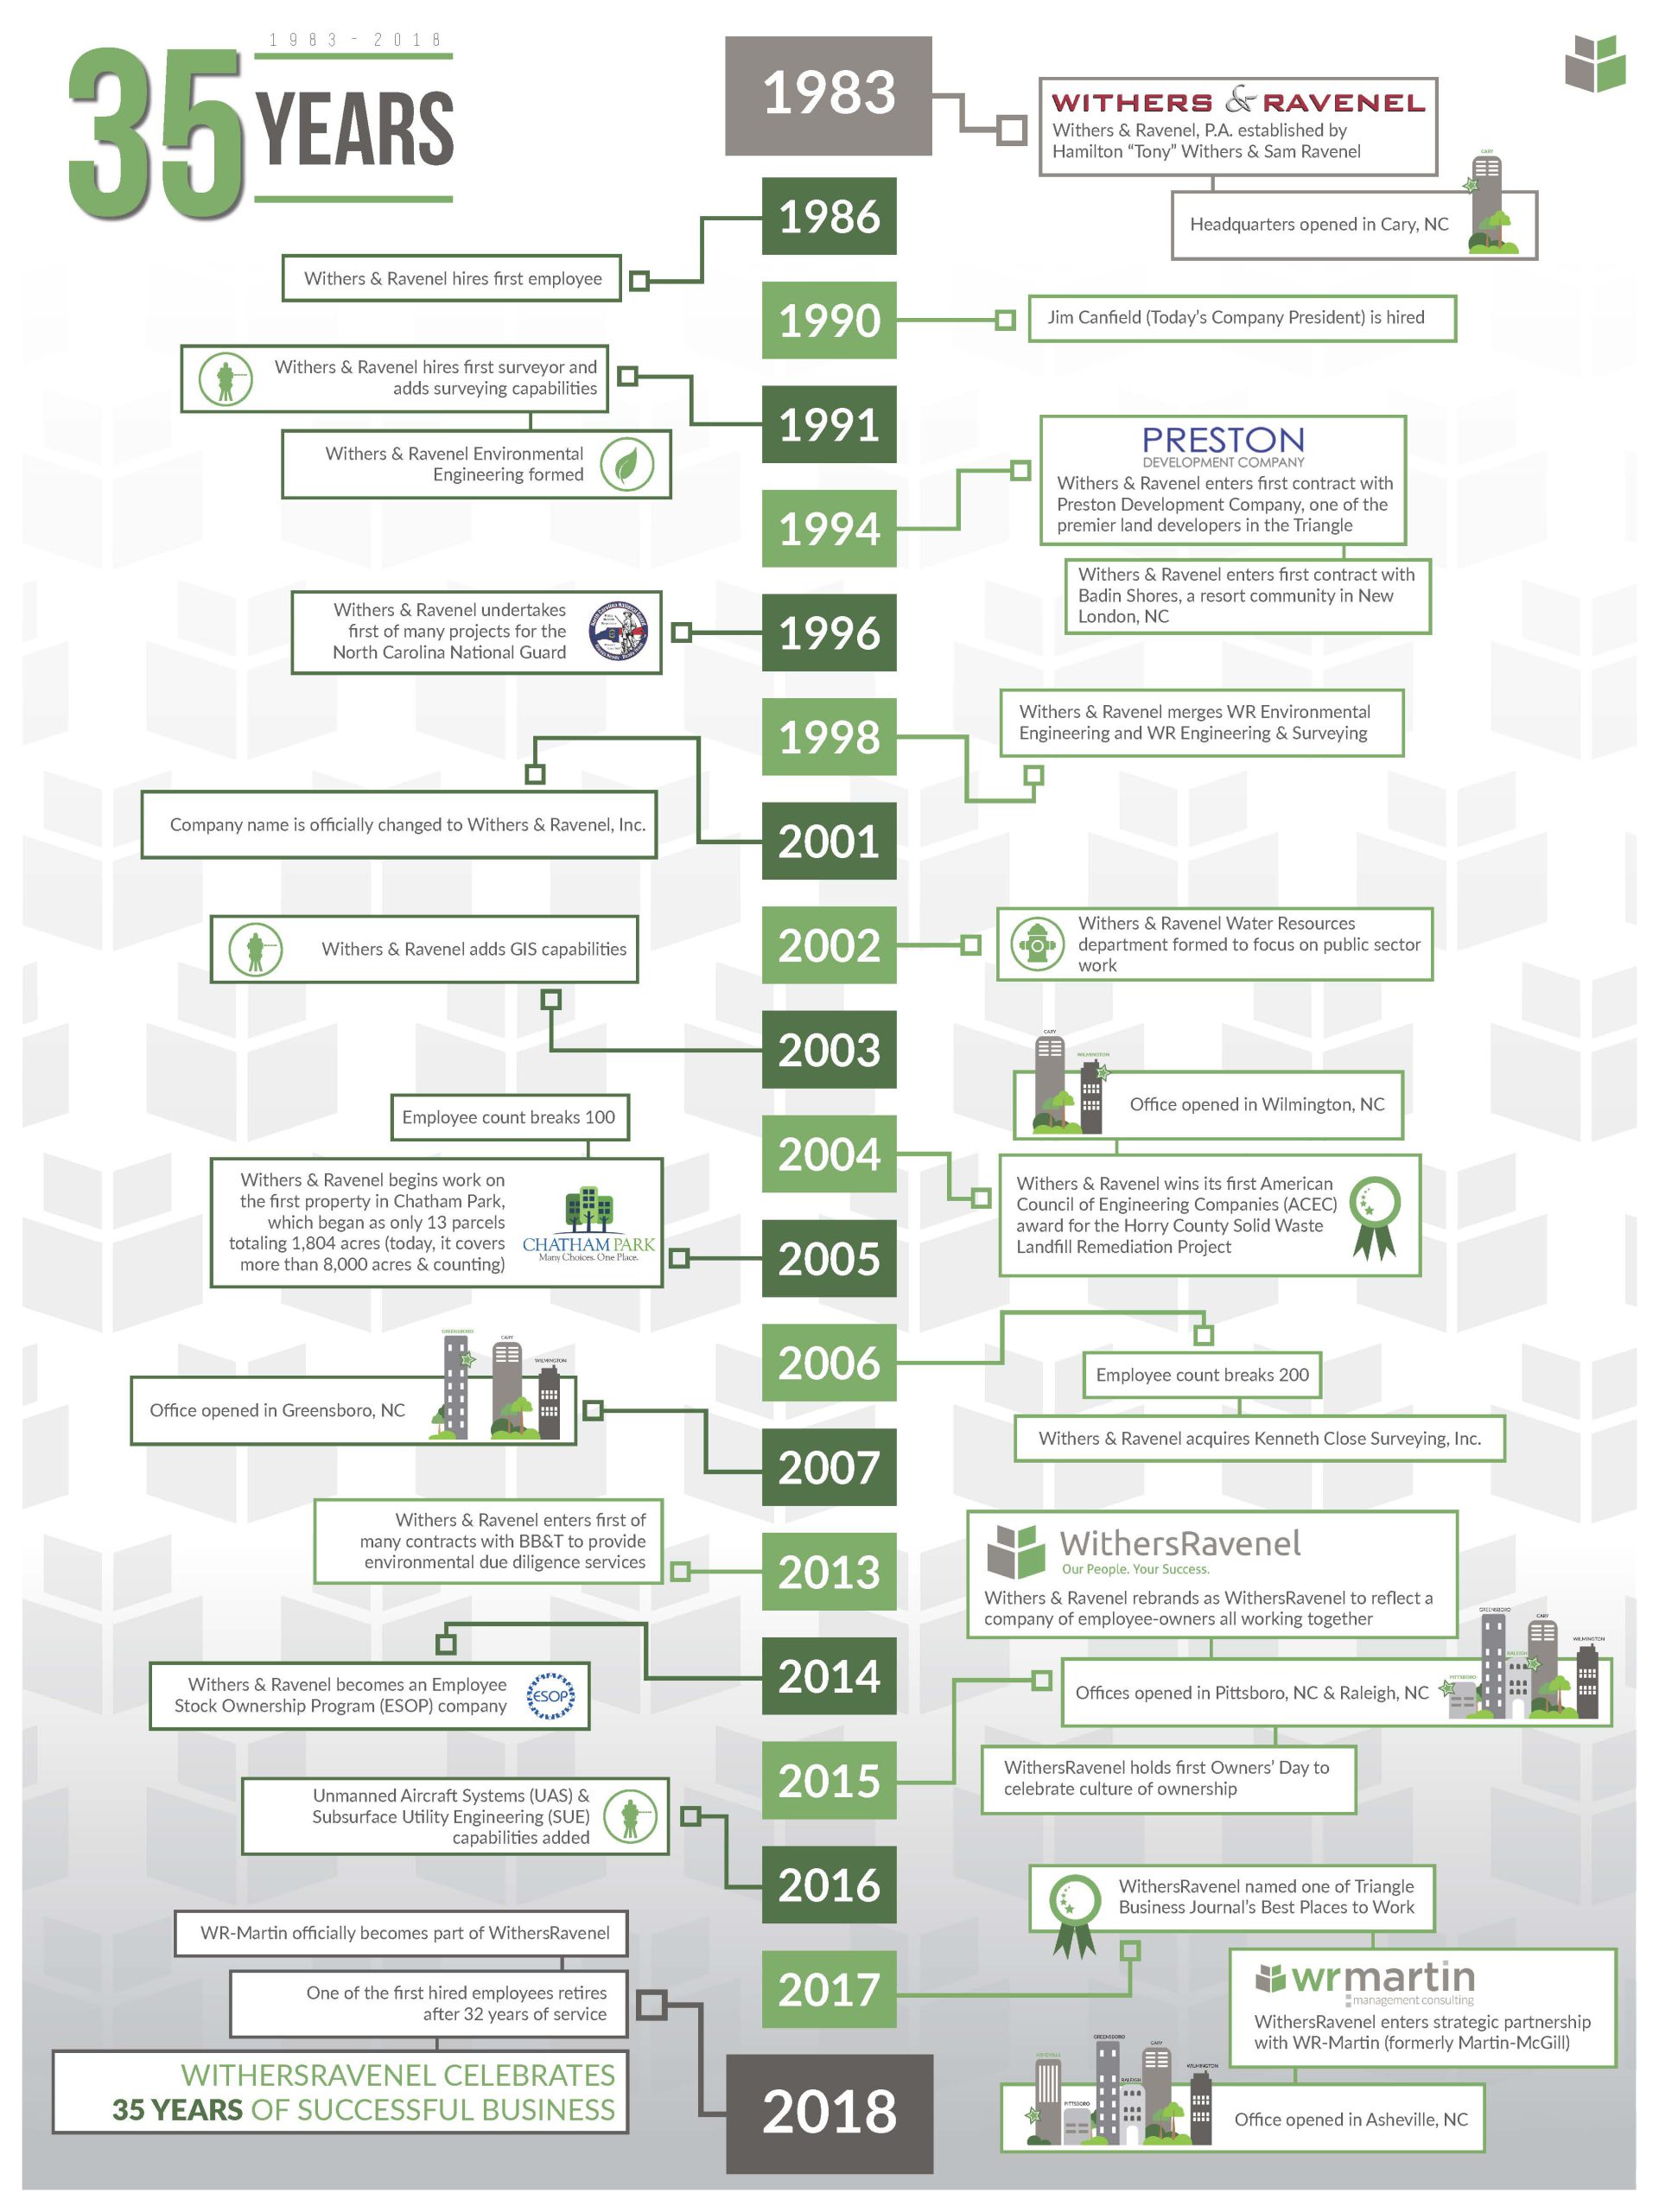 A timeline showing WithersRavenel's key achievements over the last 35 years